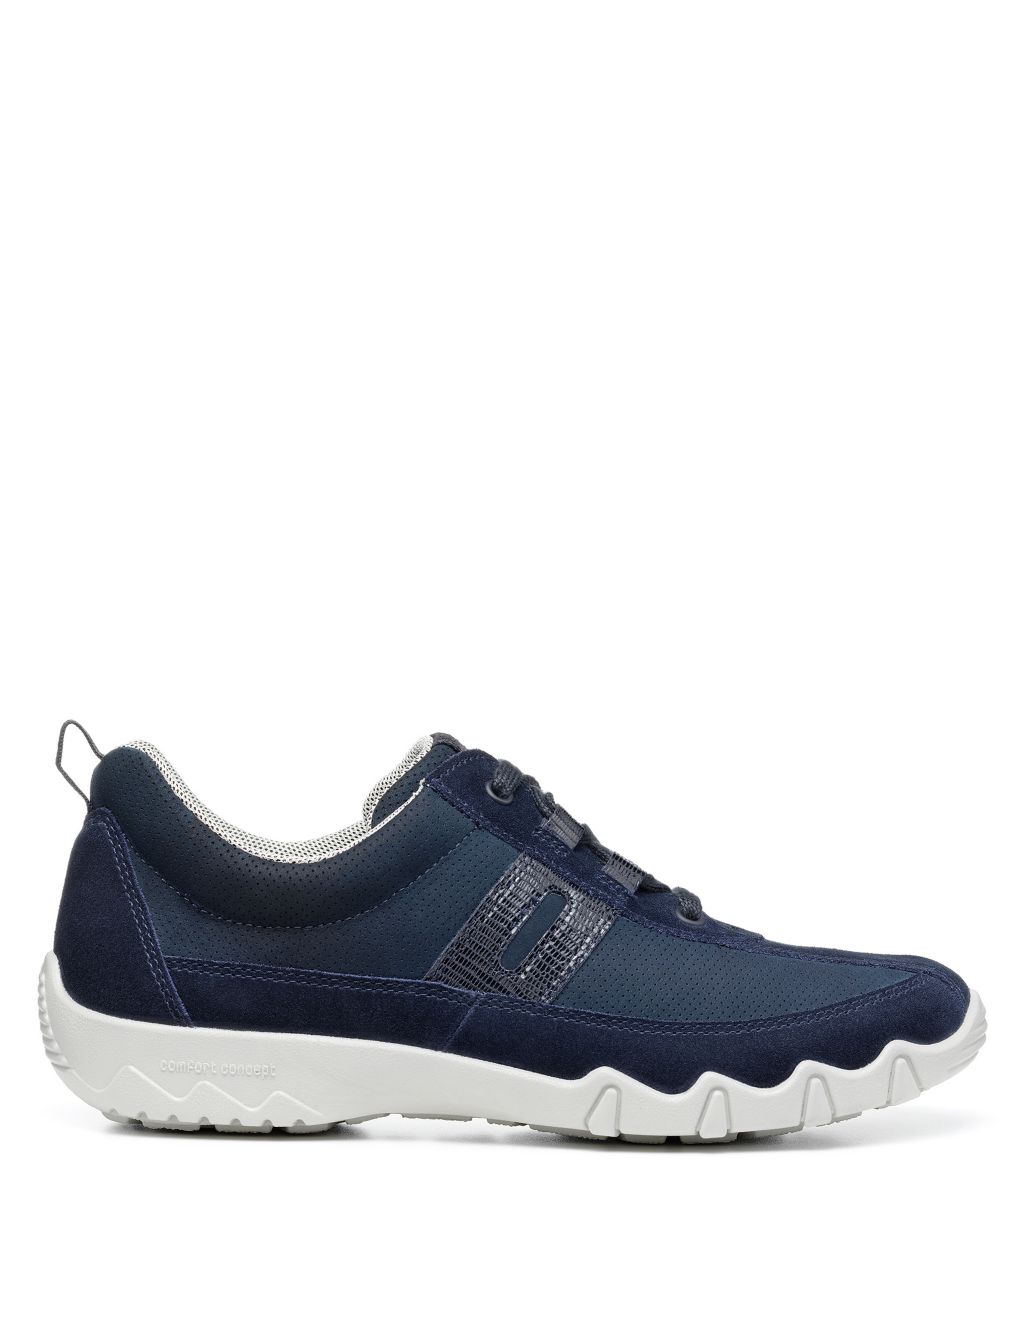 Leanne II Suede Lace Up Trainers image 1